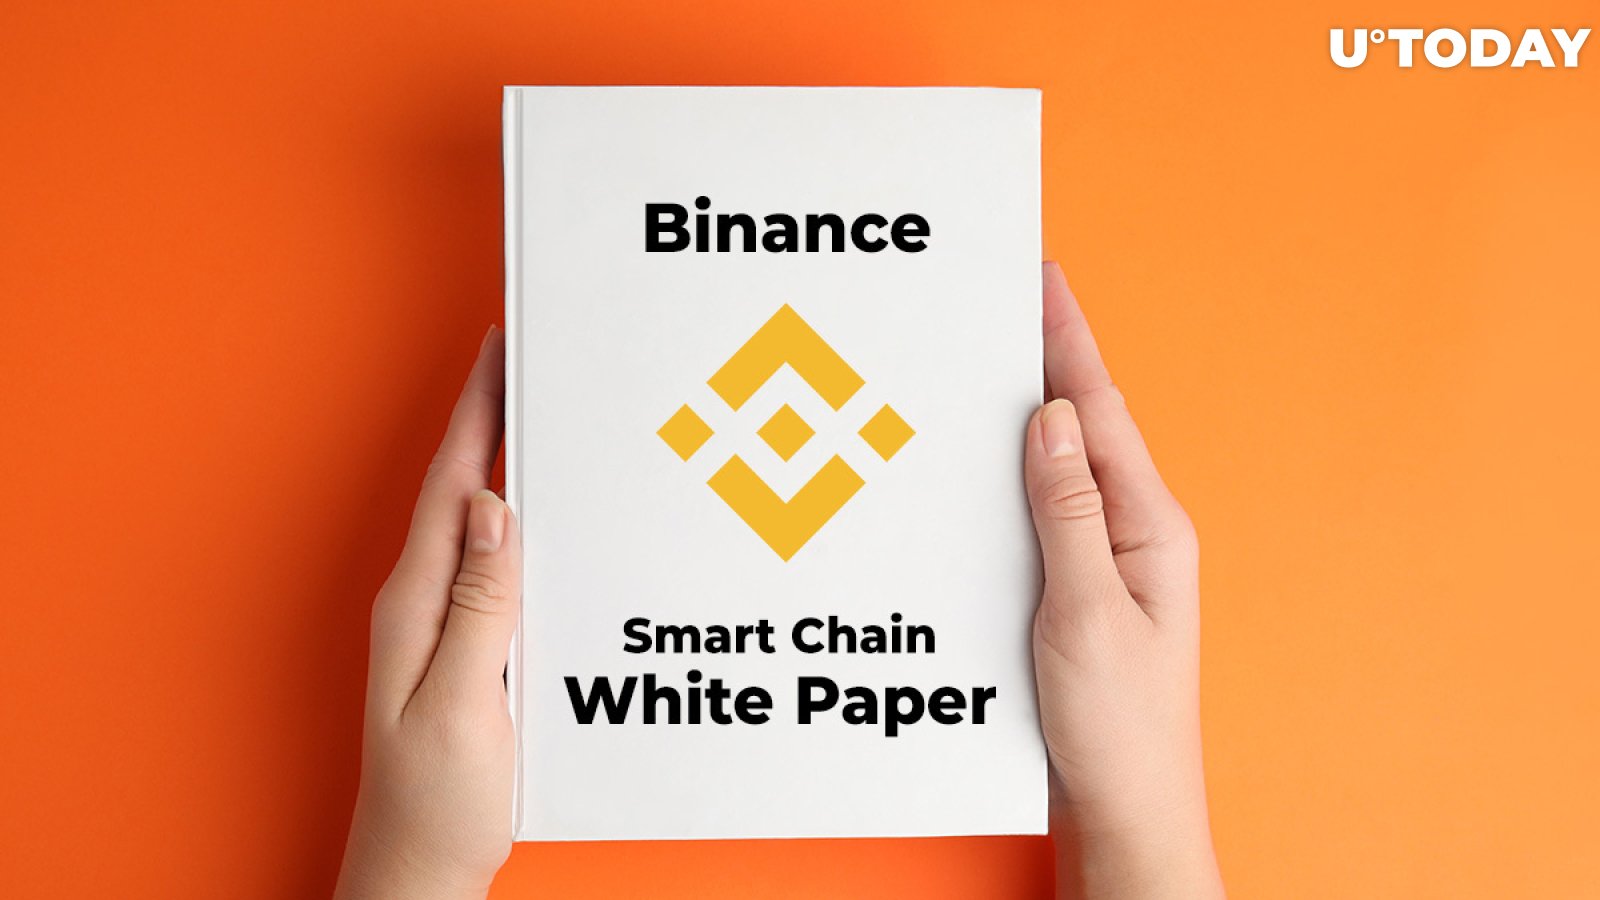 Binance (BNB) Smart Chain White Paper Released. What Does This Mean For Ethereum (ETH), EOS (EOS) and Tron (TRX)?